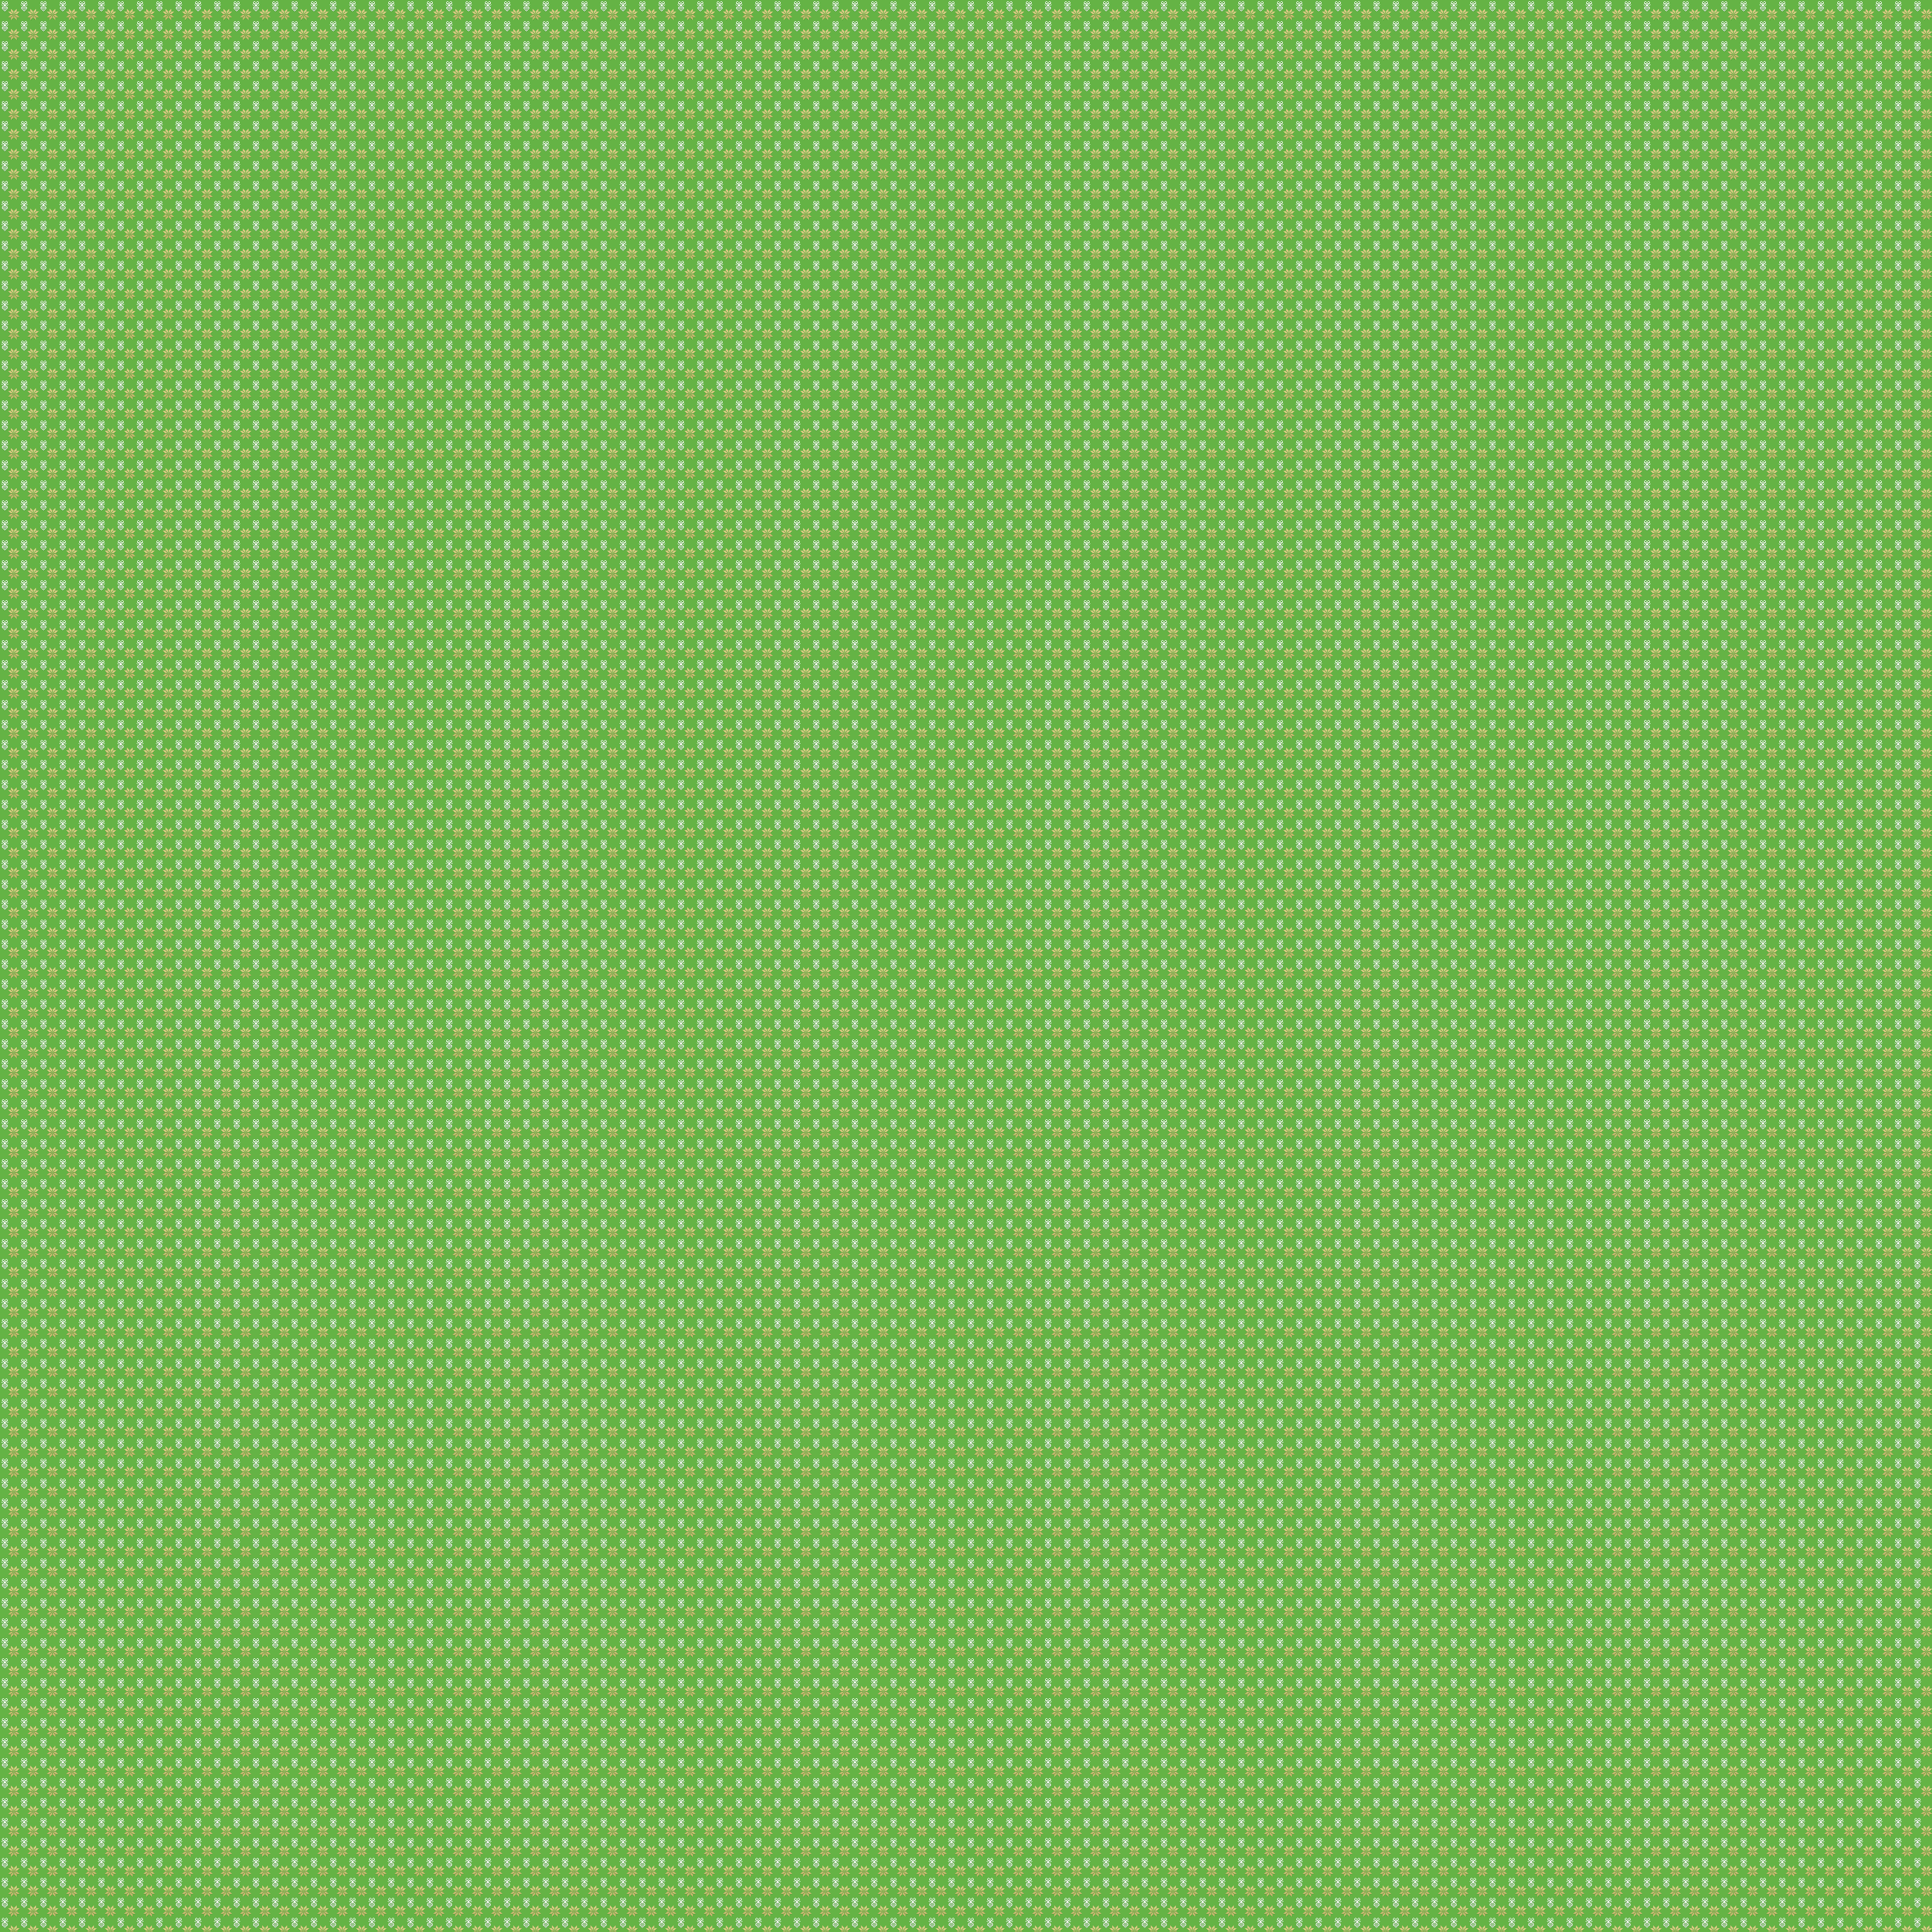 Free-Christmas-Green-Background-2.png